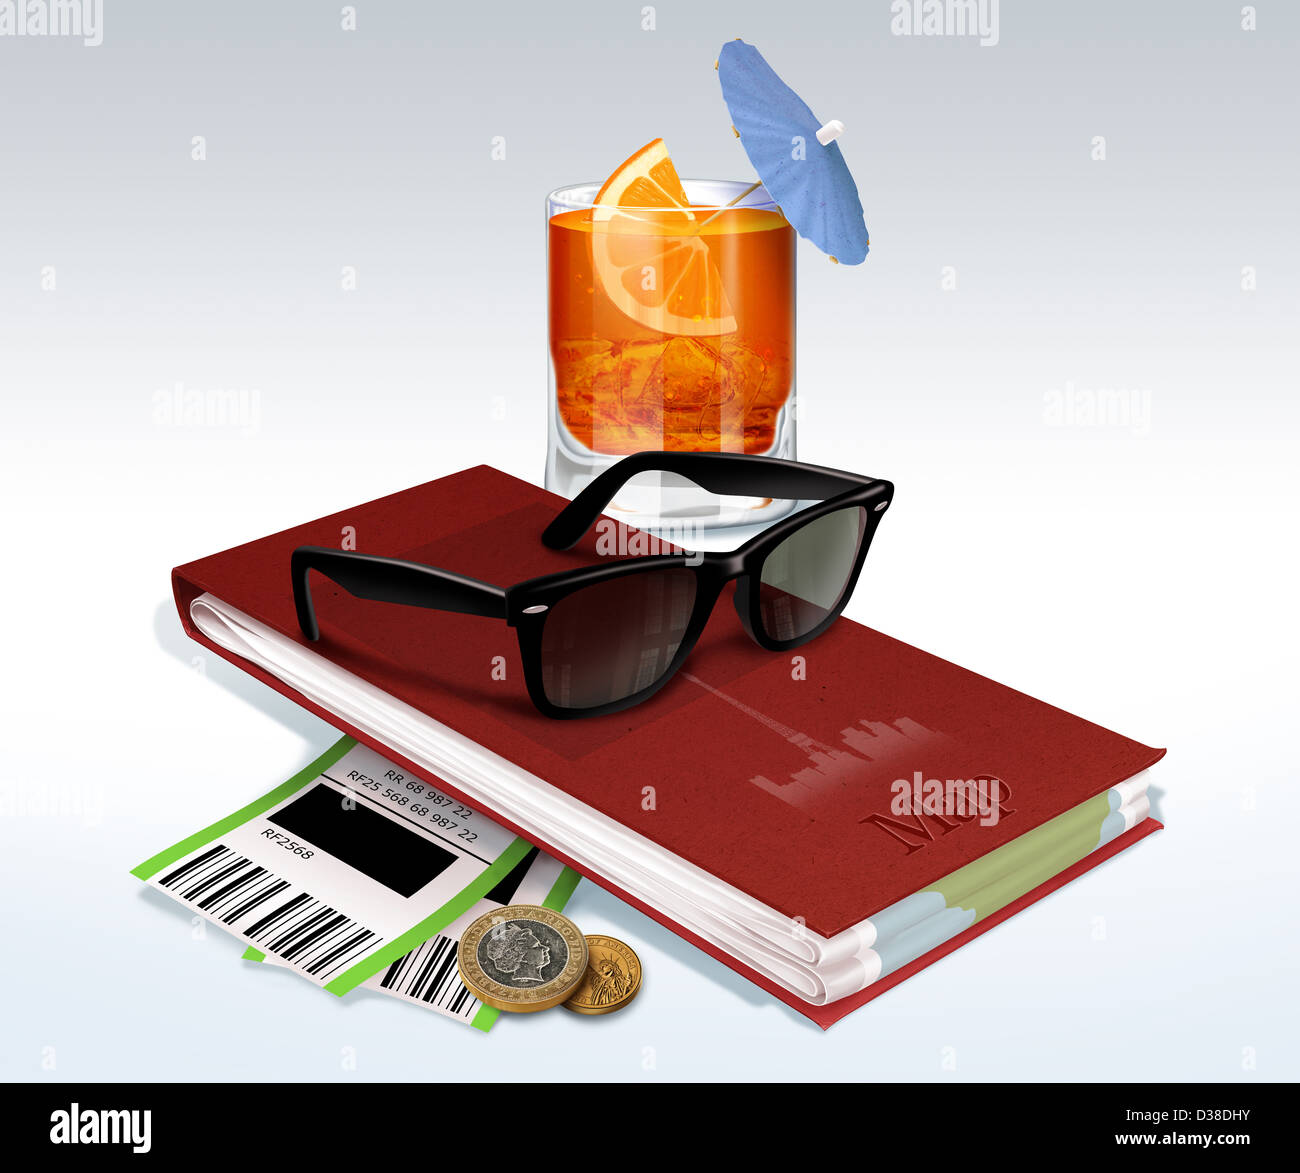 Illustrative image of drink, map book, sunglasses, boarding passes and coins representing travel Stock Photo